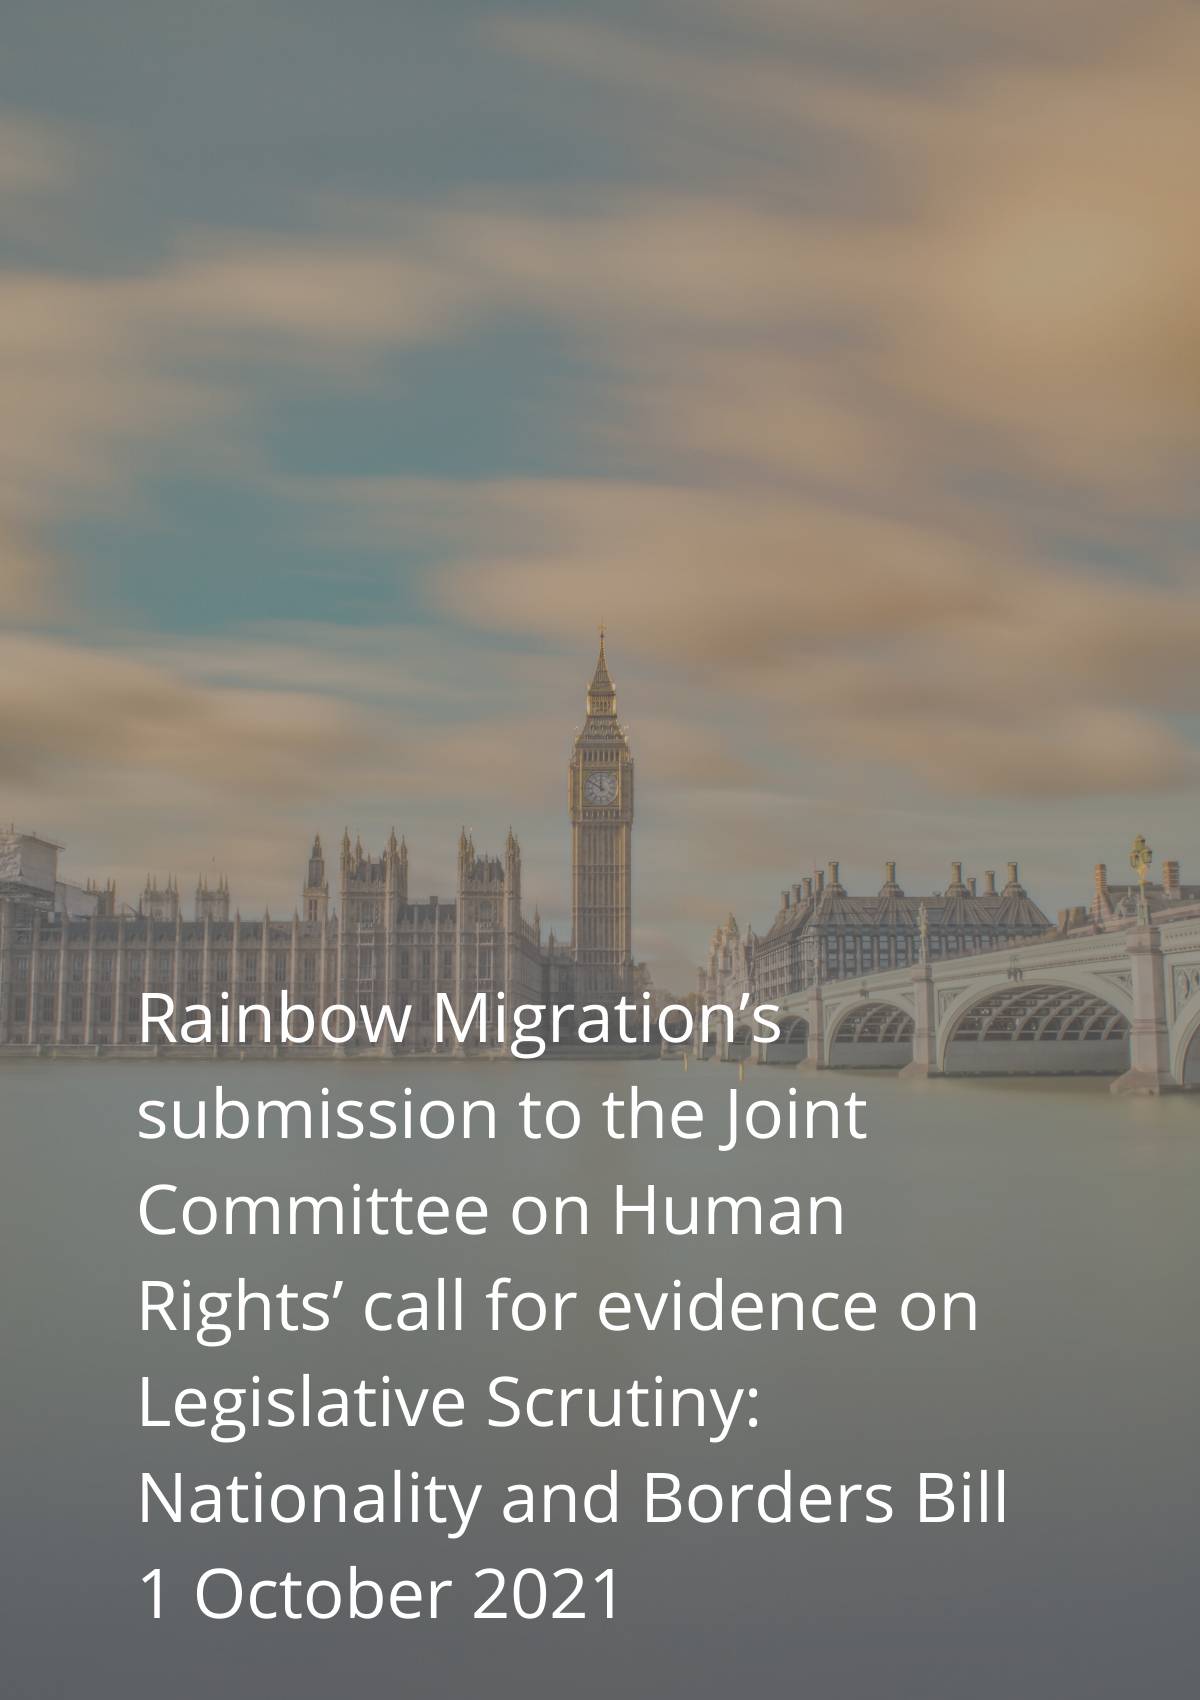 Rainbow migration's submission to the human rights committee.